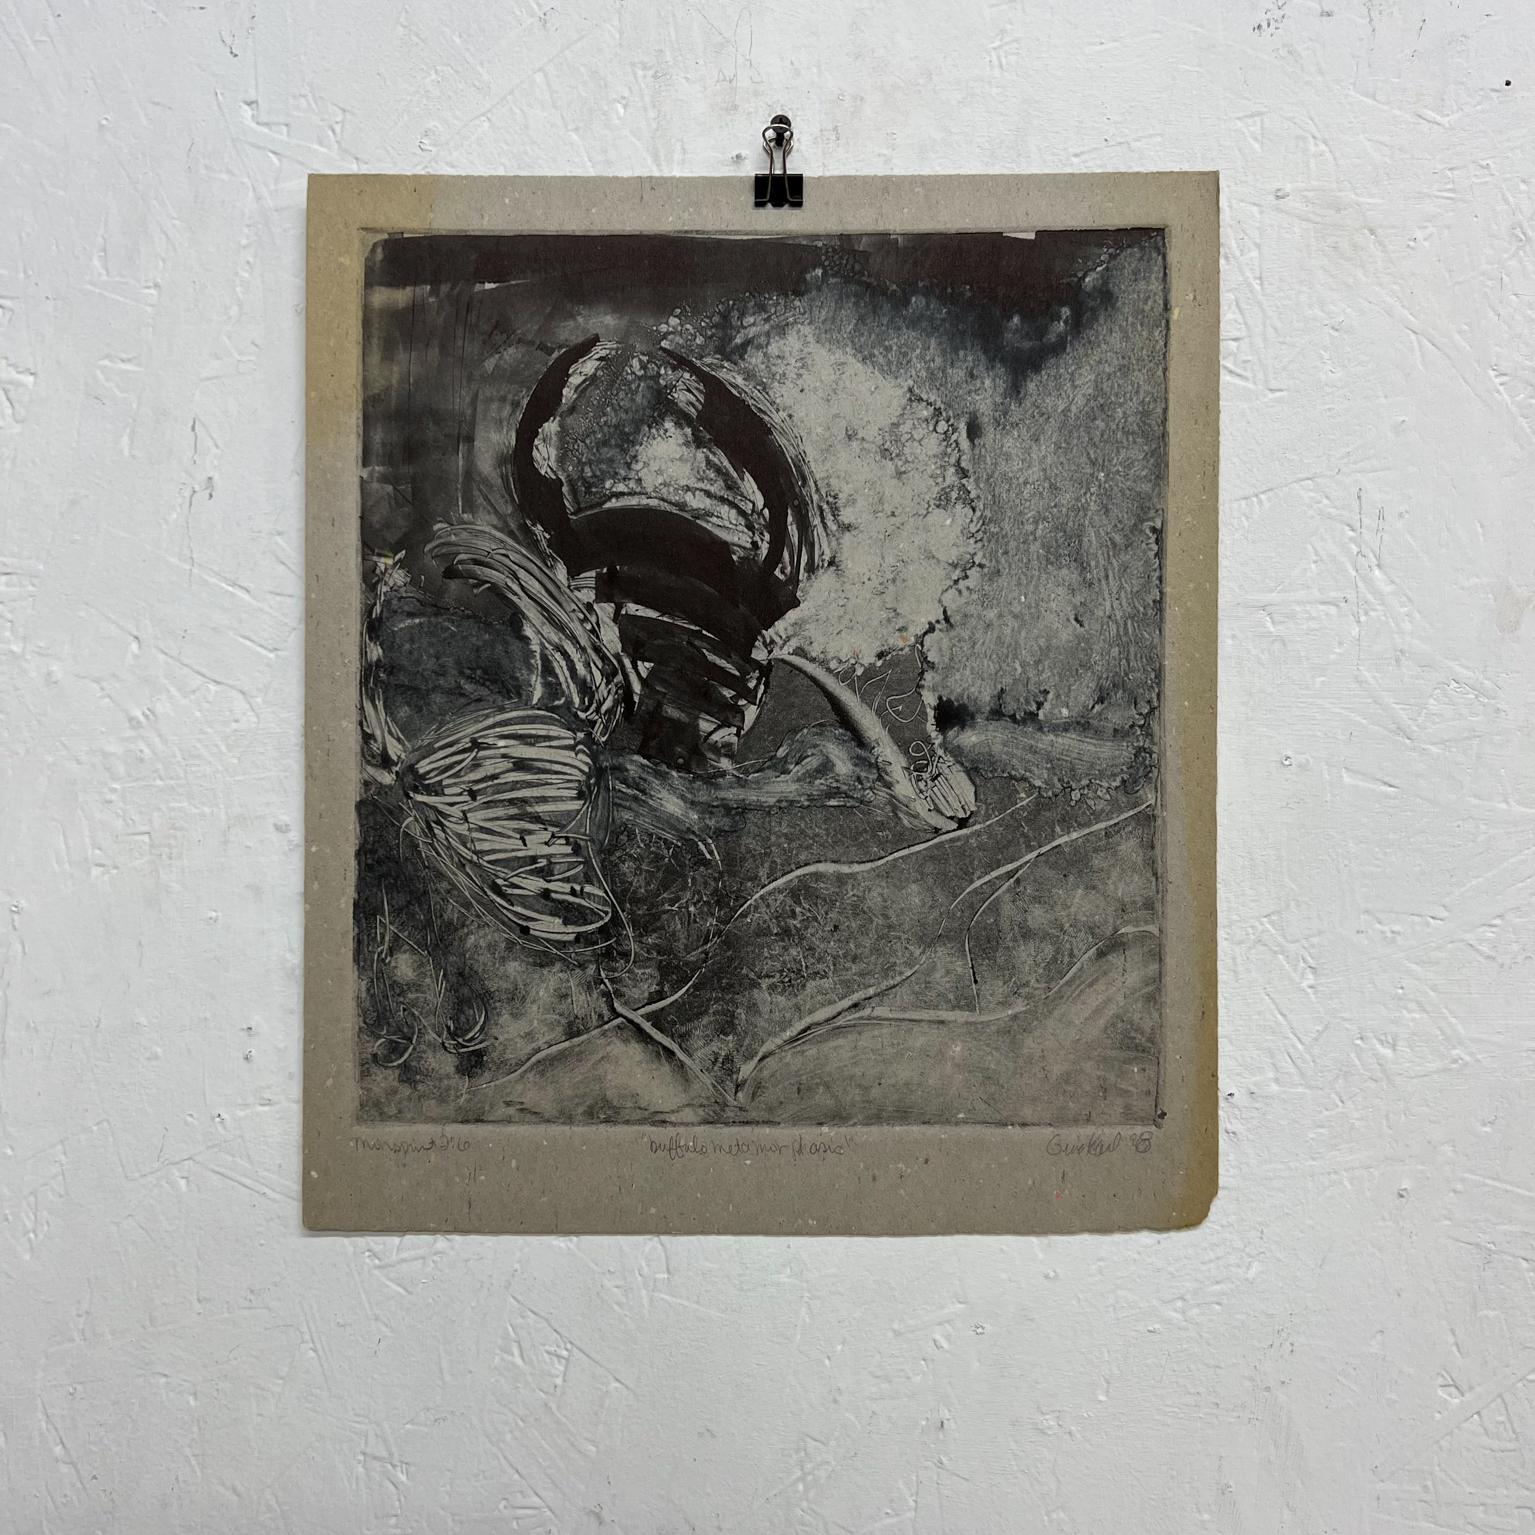 Art by Gina Kail 1998 buffalo metamorphosis 2:6 monoprint.
Measures: 14 x 16.5.
Signed by artist.
Preowned original vintage art.
See images provided.